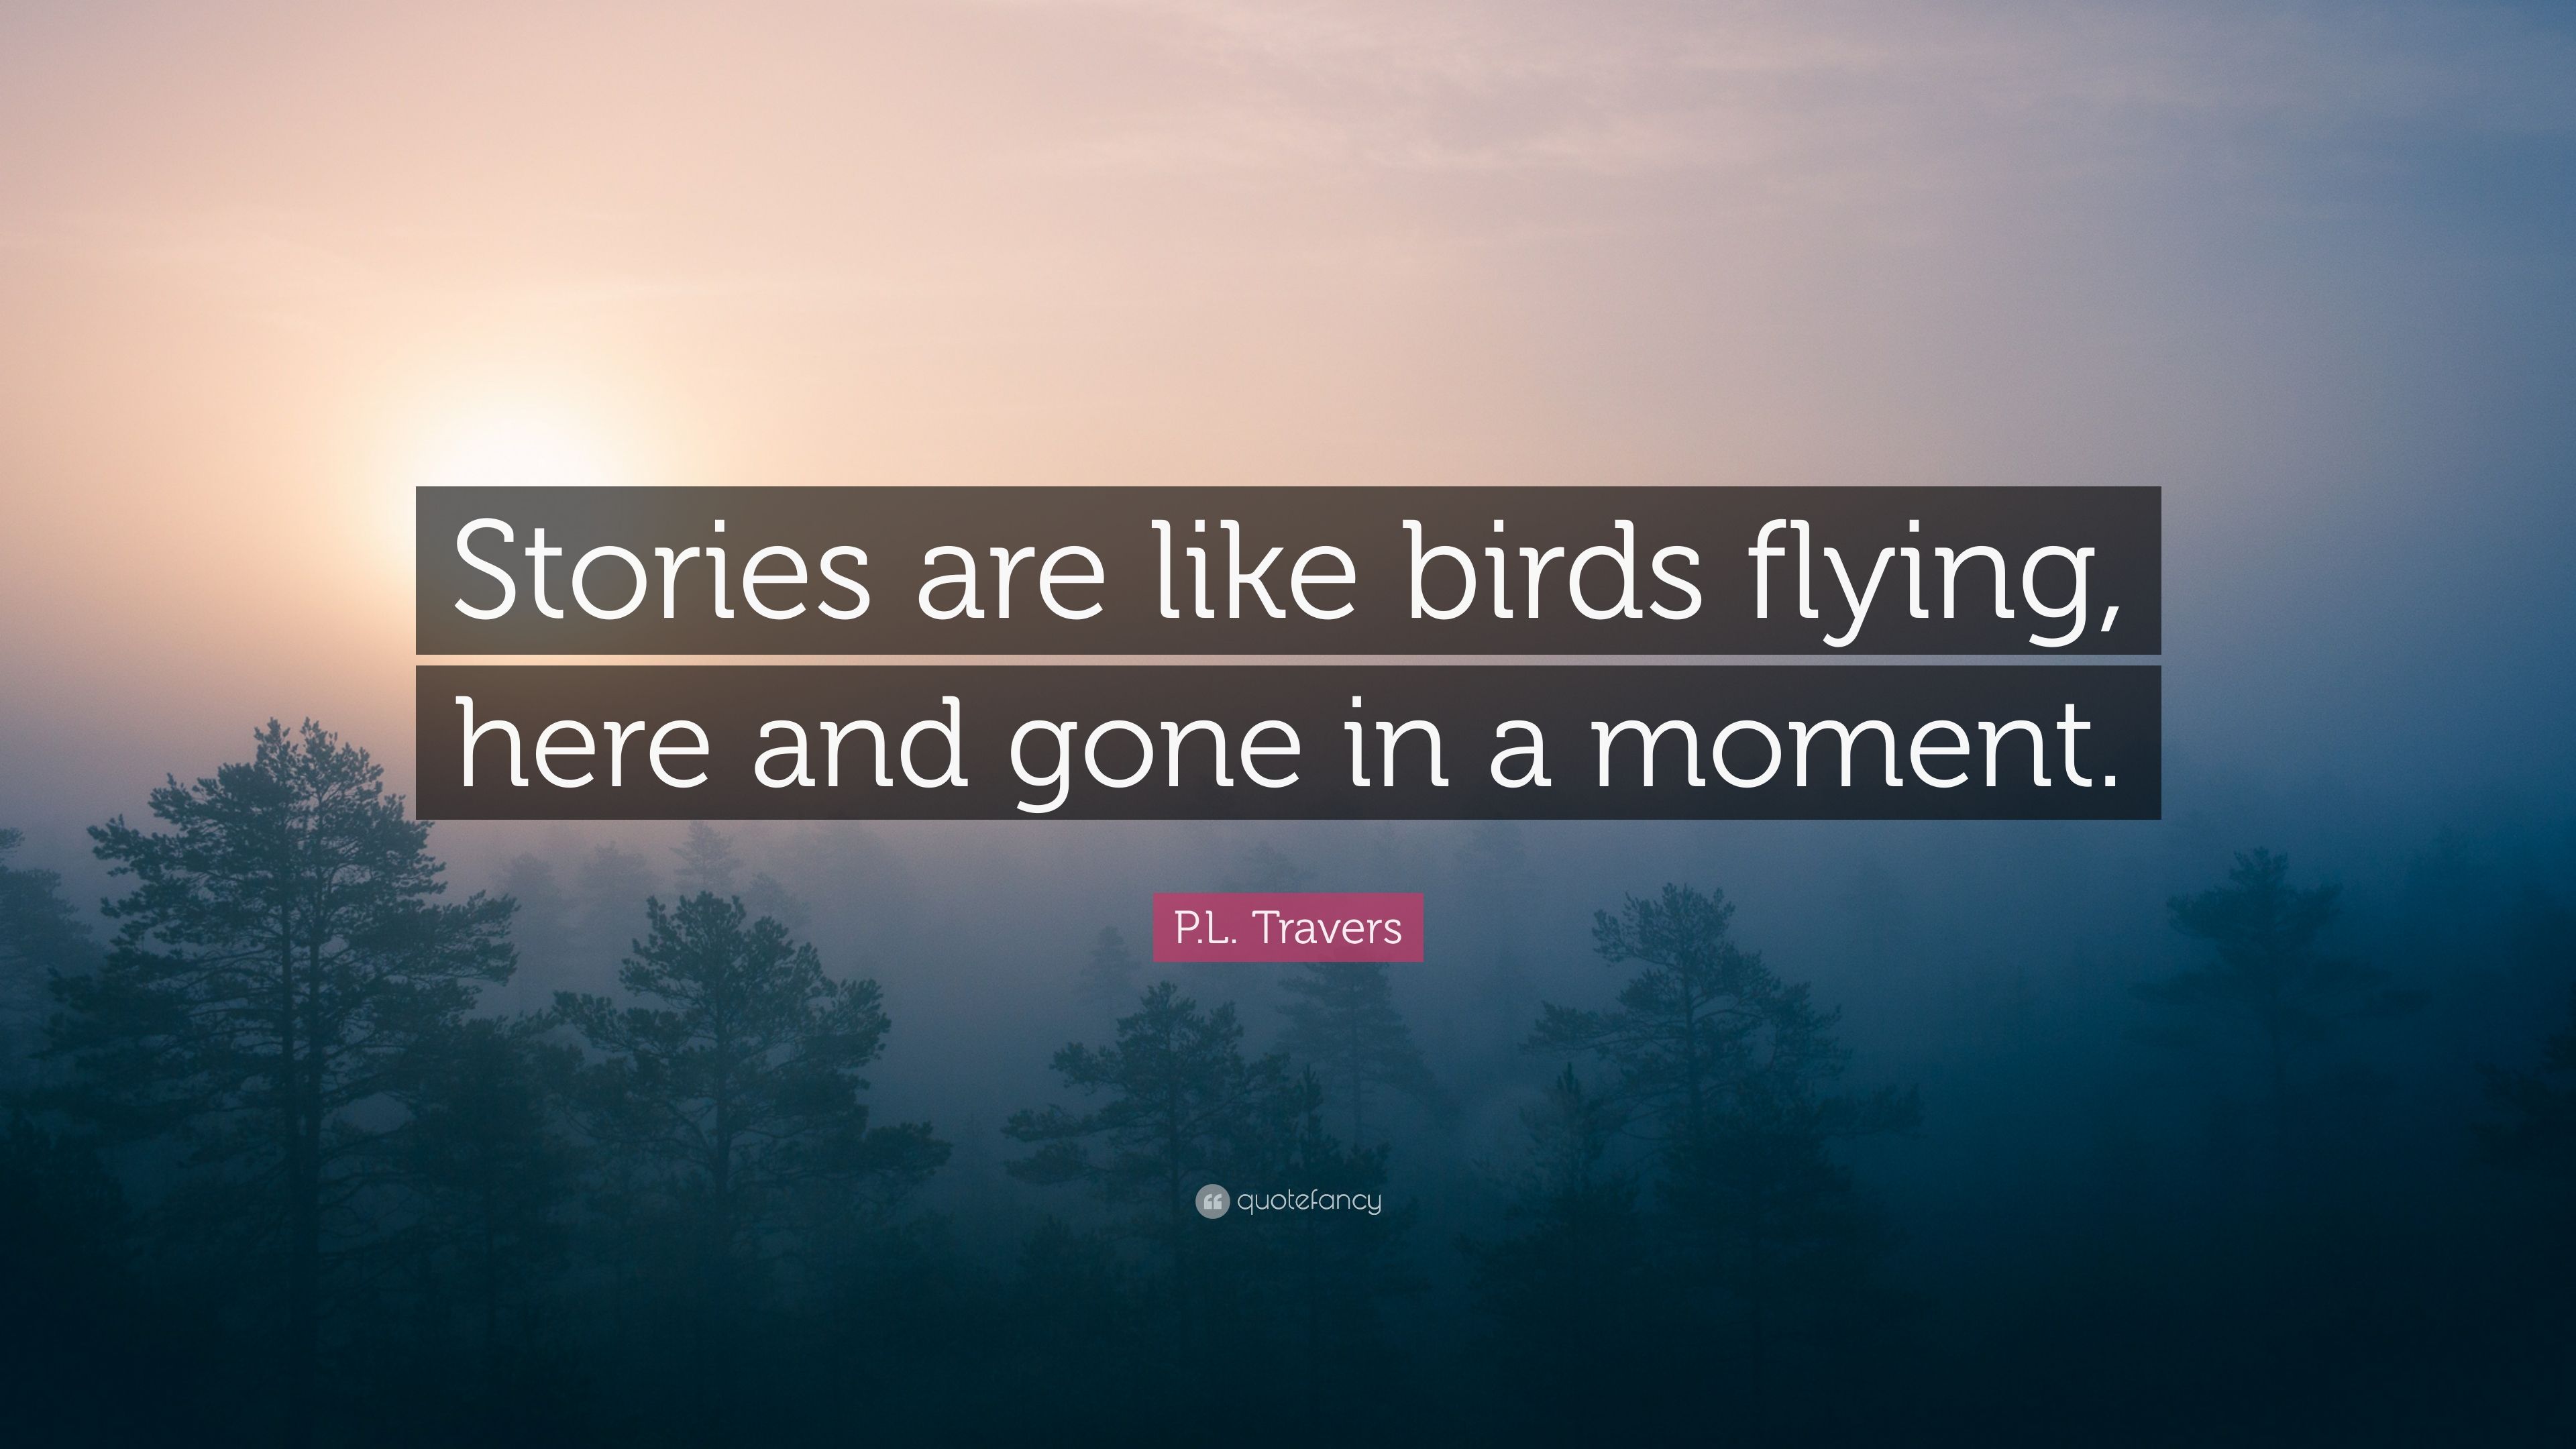 P.L. Travers Quote: “Stories are like birds flying, here and gone in ...